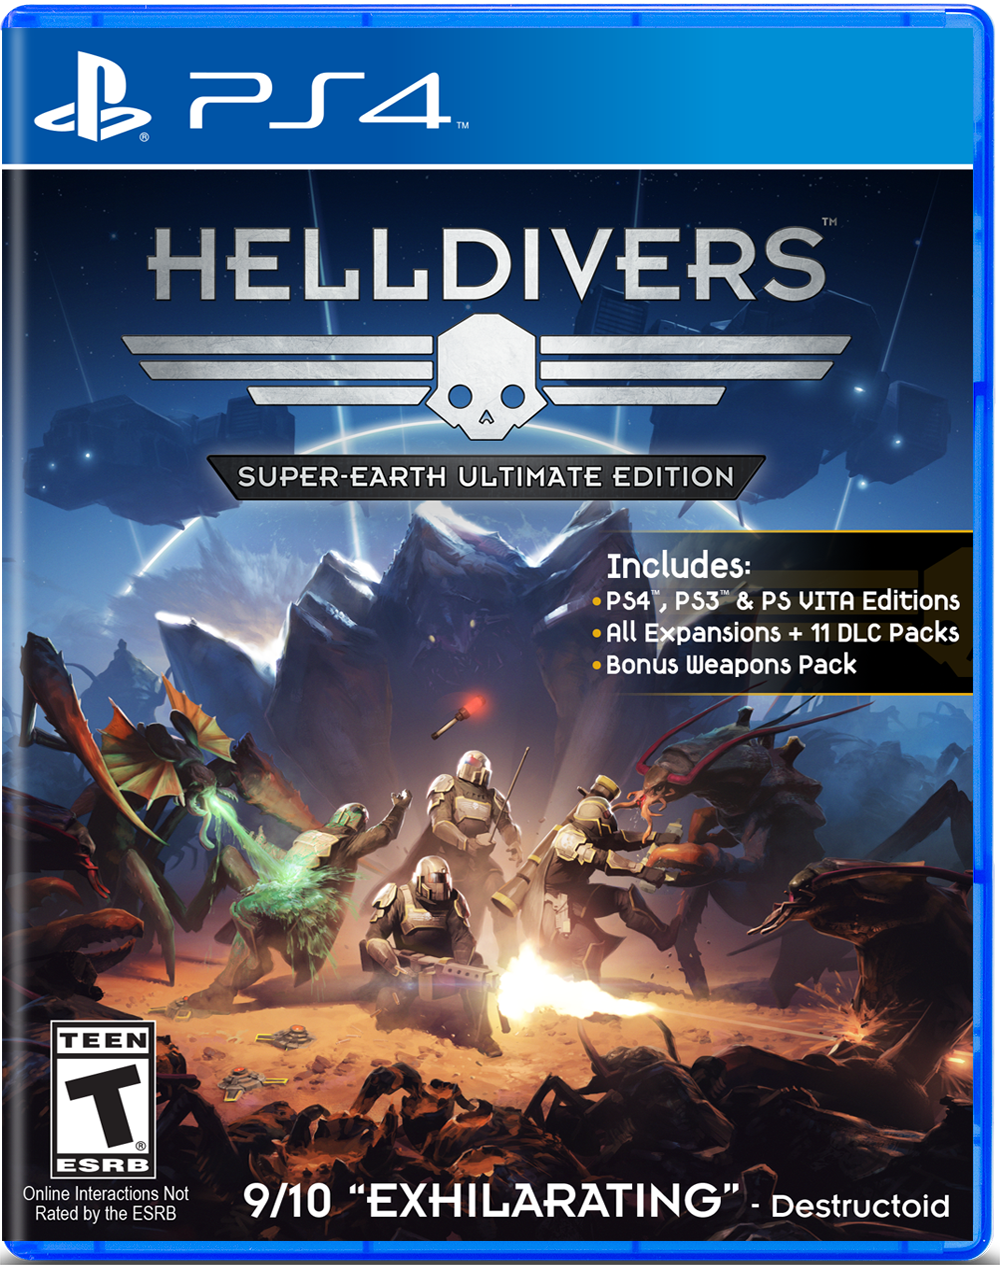 Helldivers Super-Earth Ultimate Edition - PlayStation 4